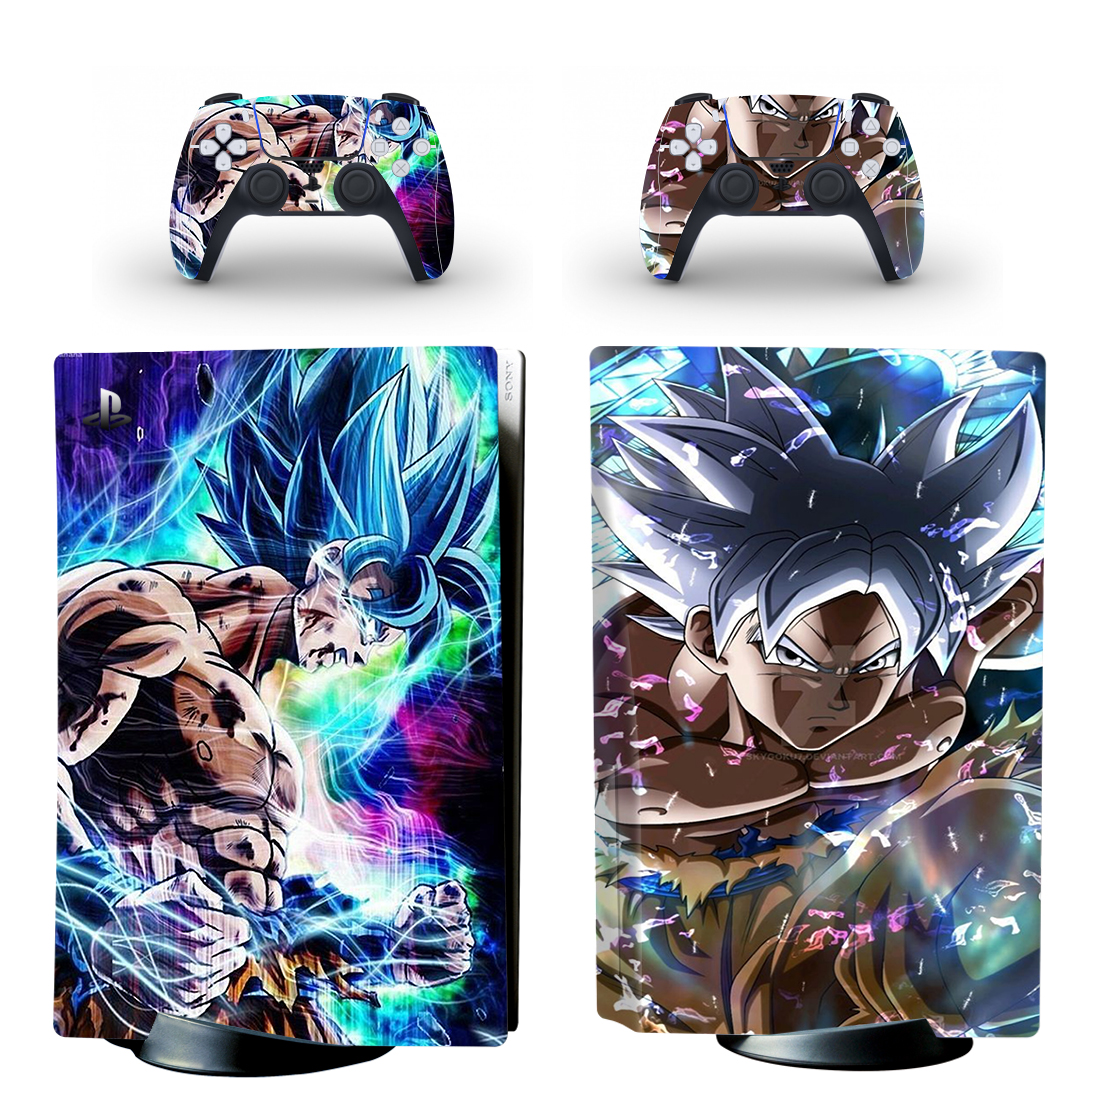 Dragon Ball Goku PS5 Skin Sticker For PlayStation 5 And Controllers